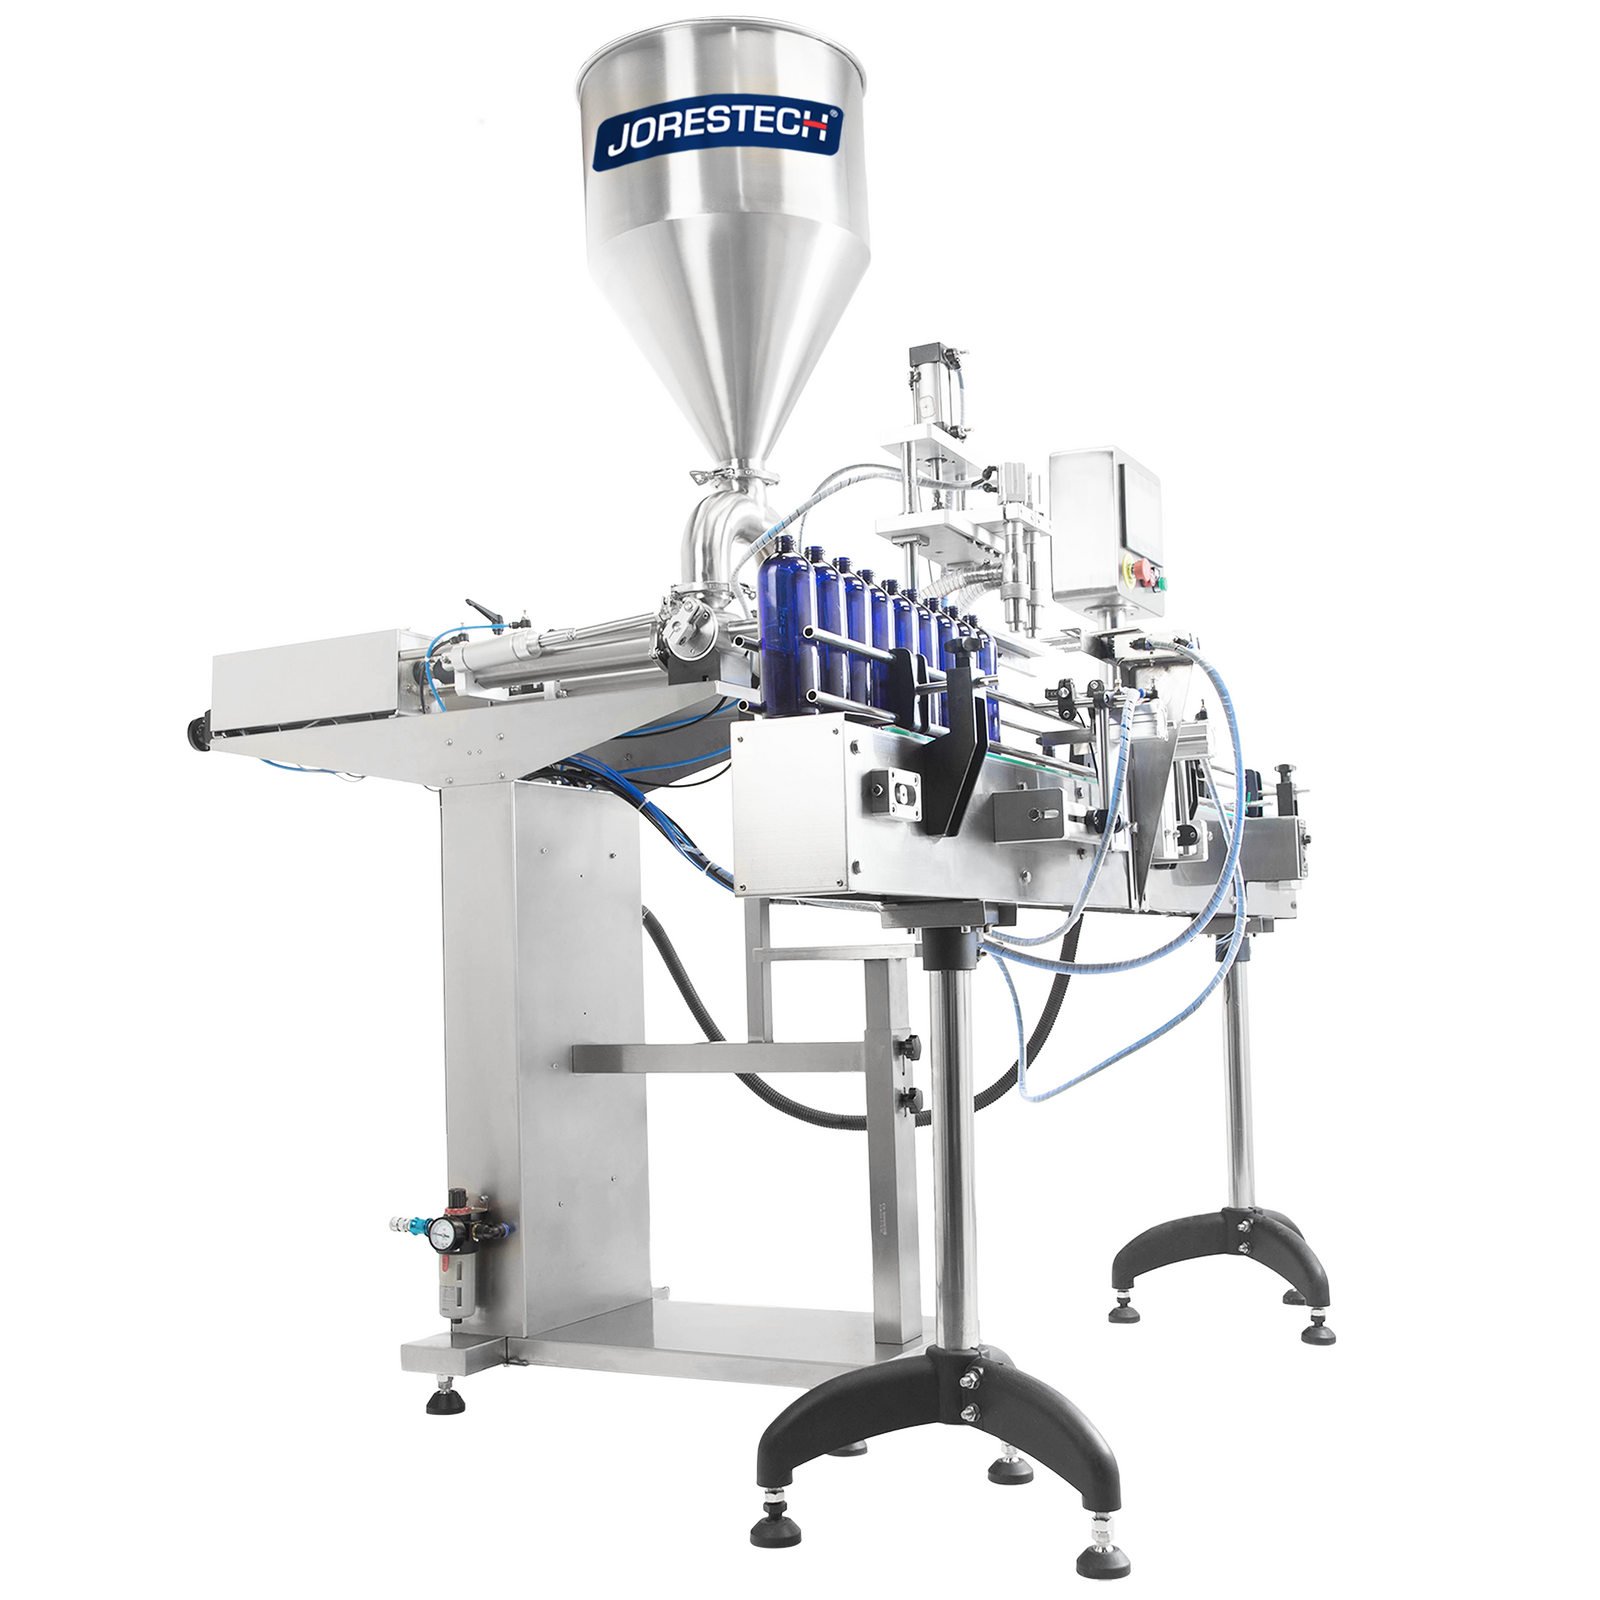 Automatic dual head high viscosity paste filling system. It has several blue bottles that are placed on the conveyor being filled by the machine